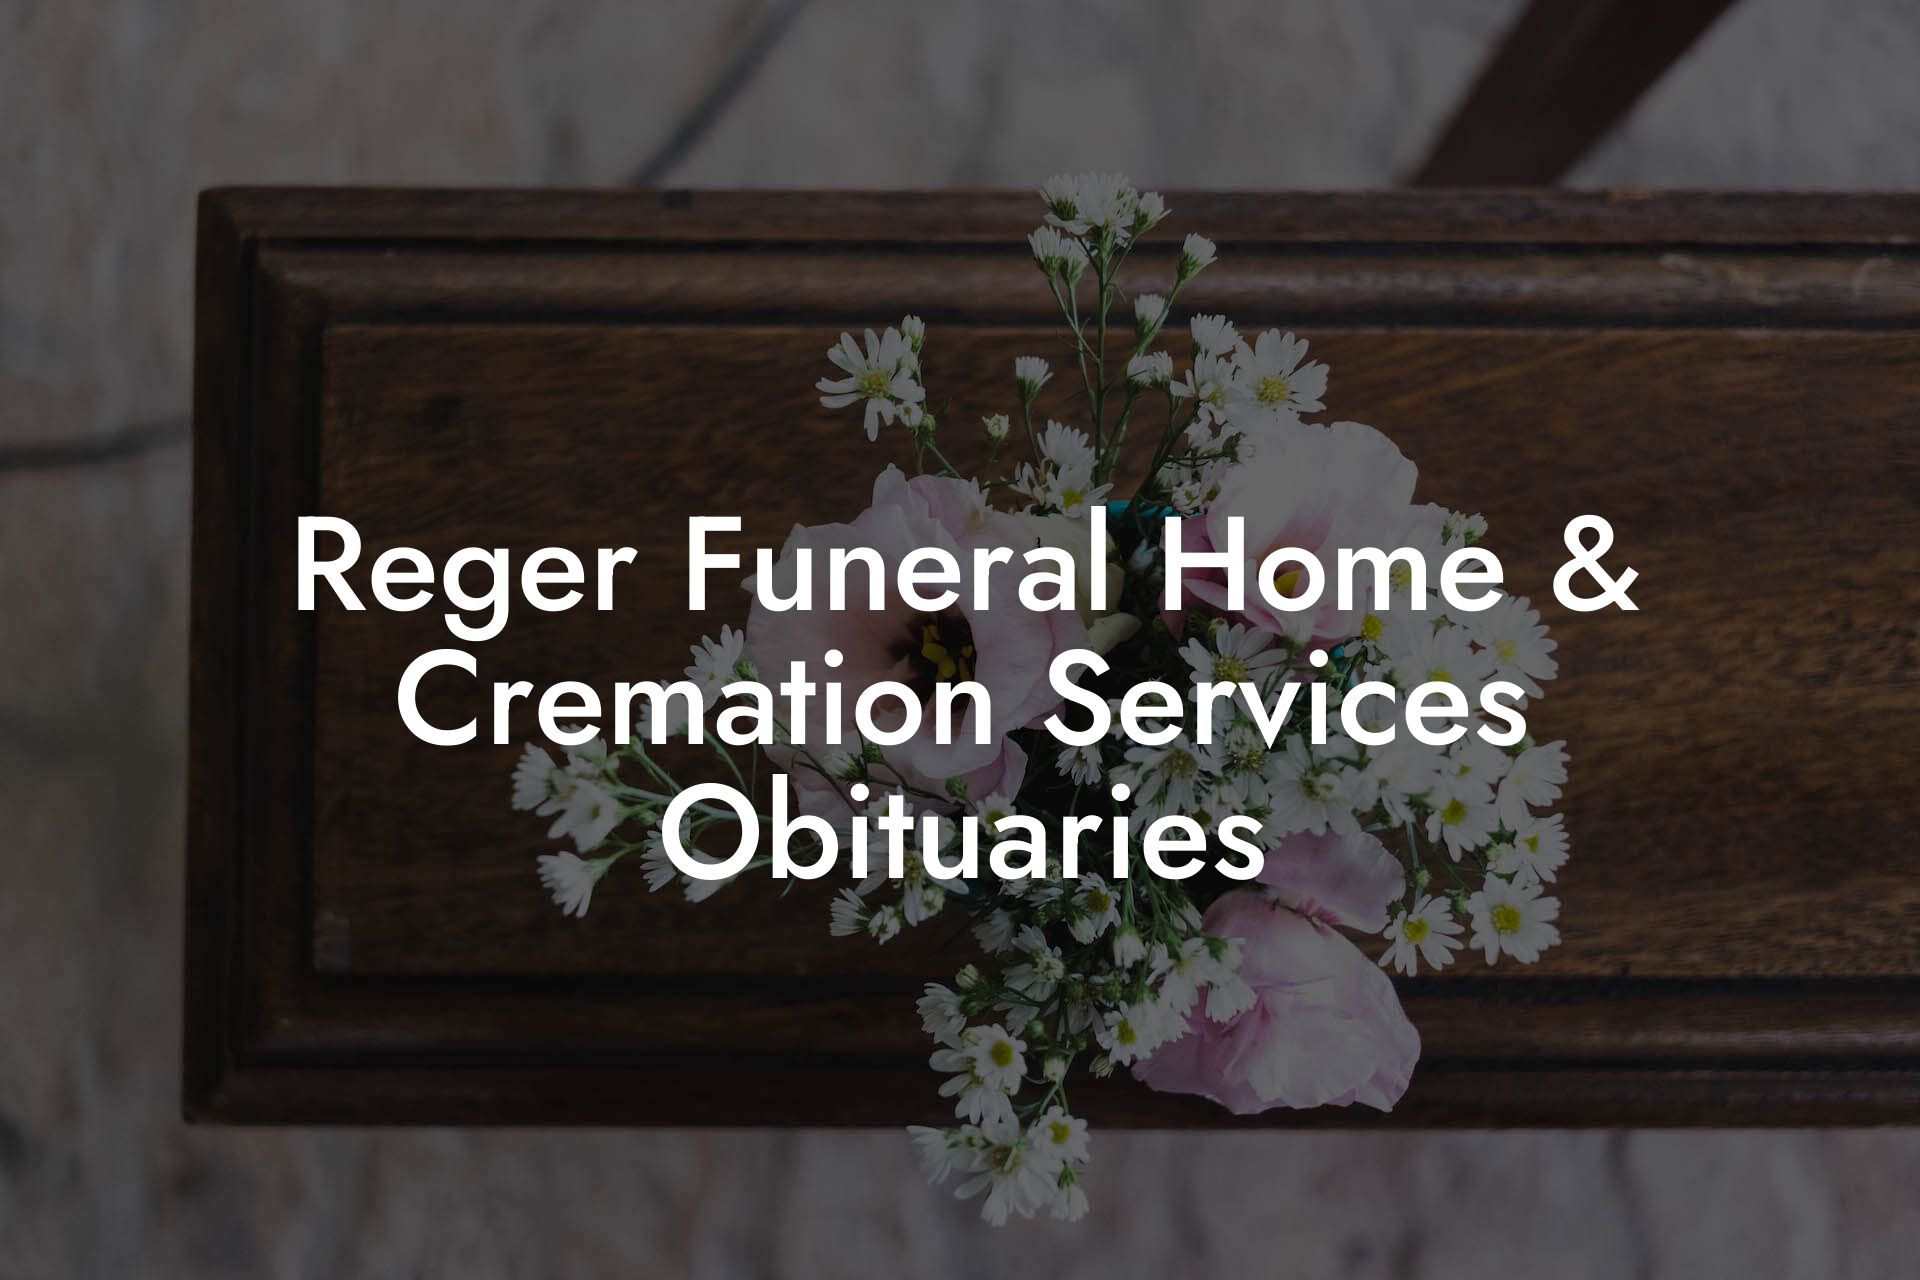 Reger Funeral Home & Cremation Services Obituaries